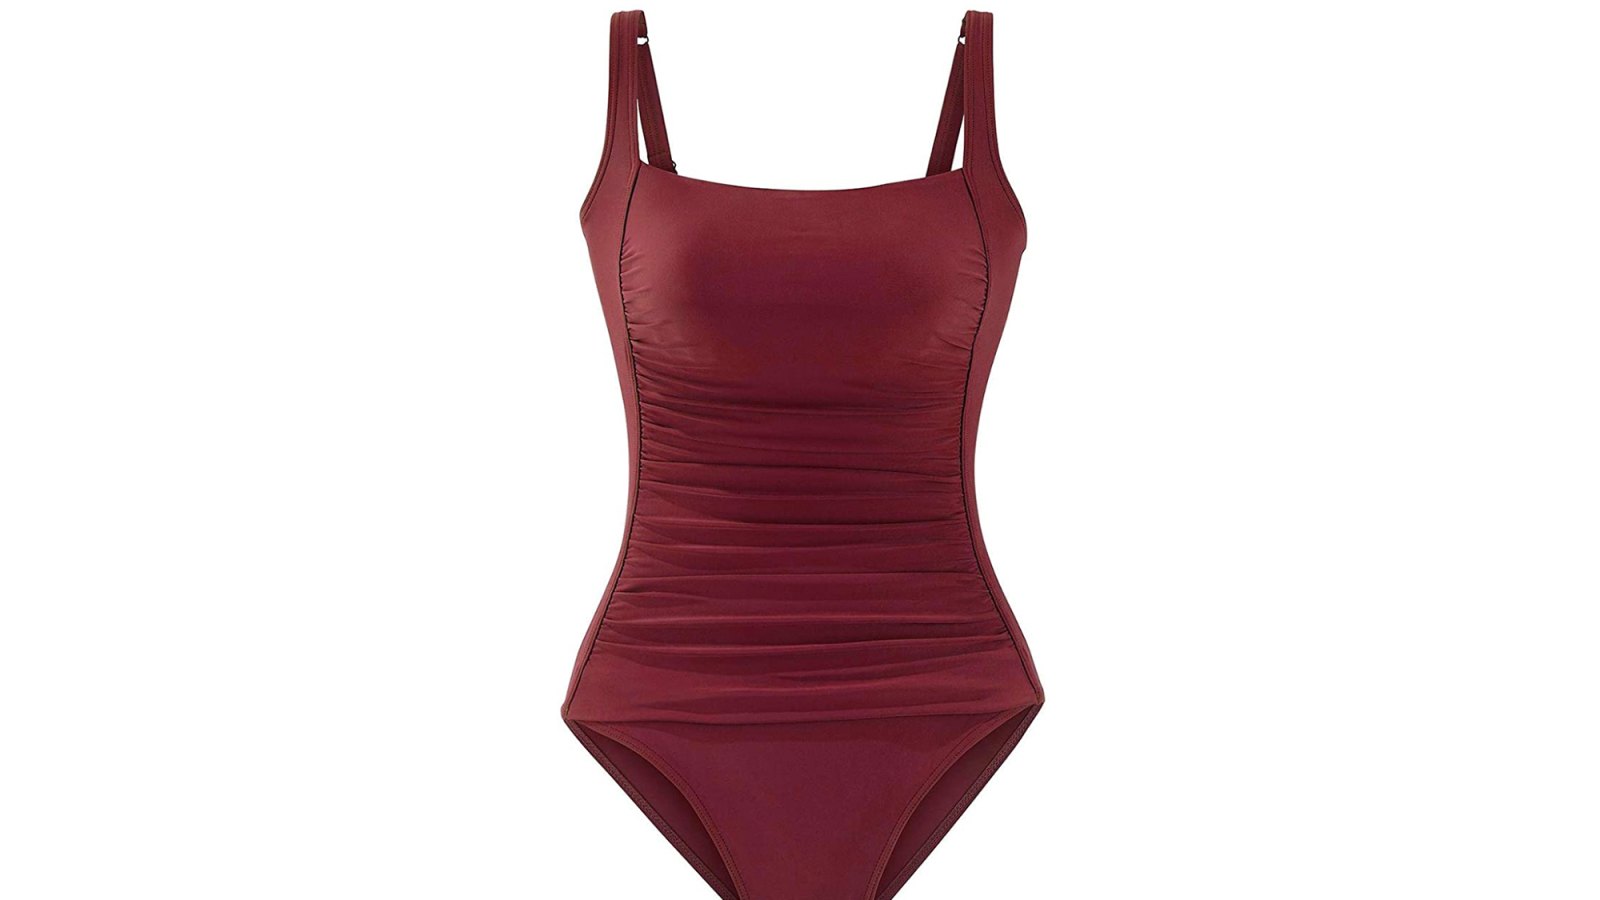 Upopby Swimsuit Has Slimming Effects That You Won't Believe